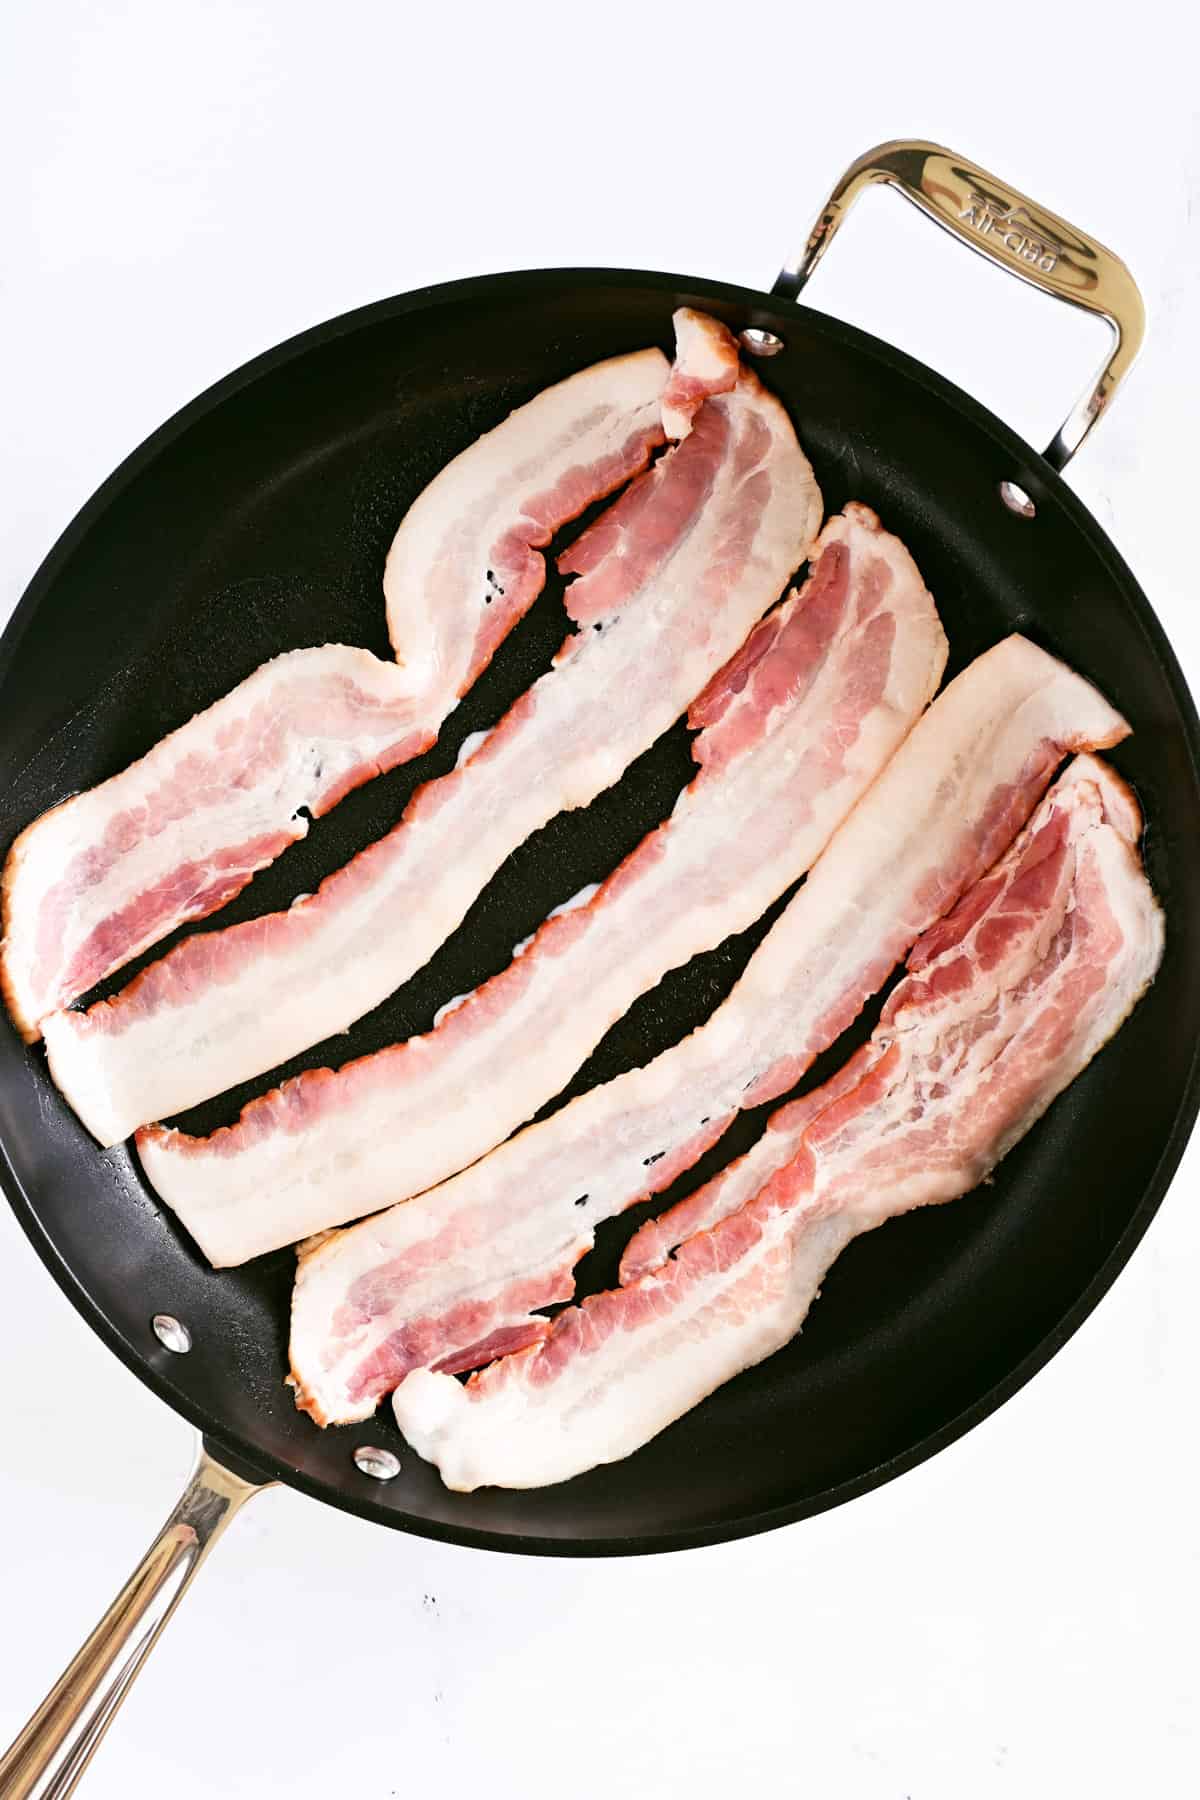 Five strips of uncooked bacon in a frying pan.